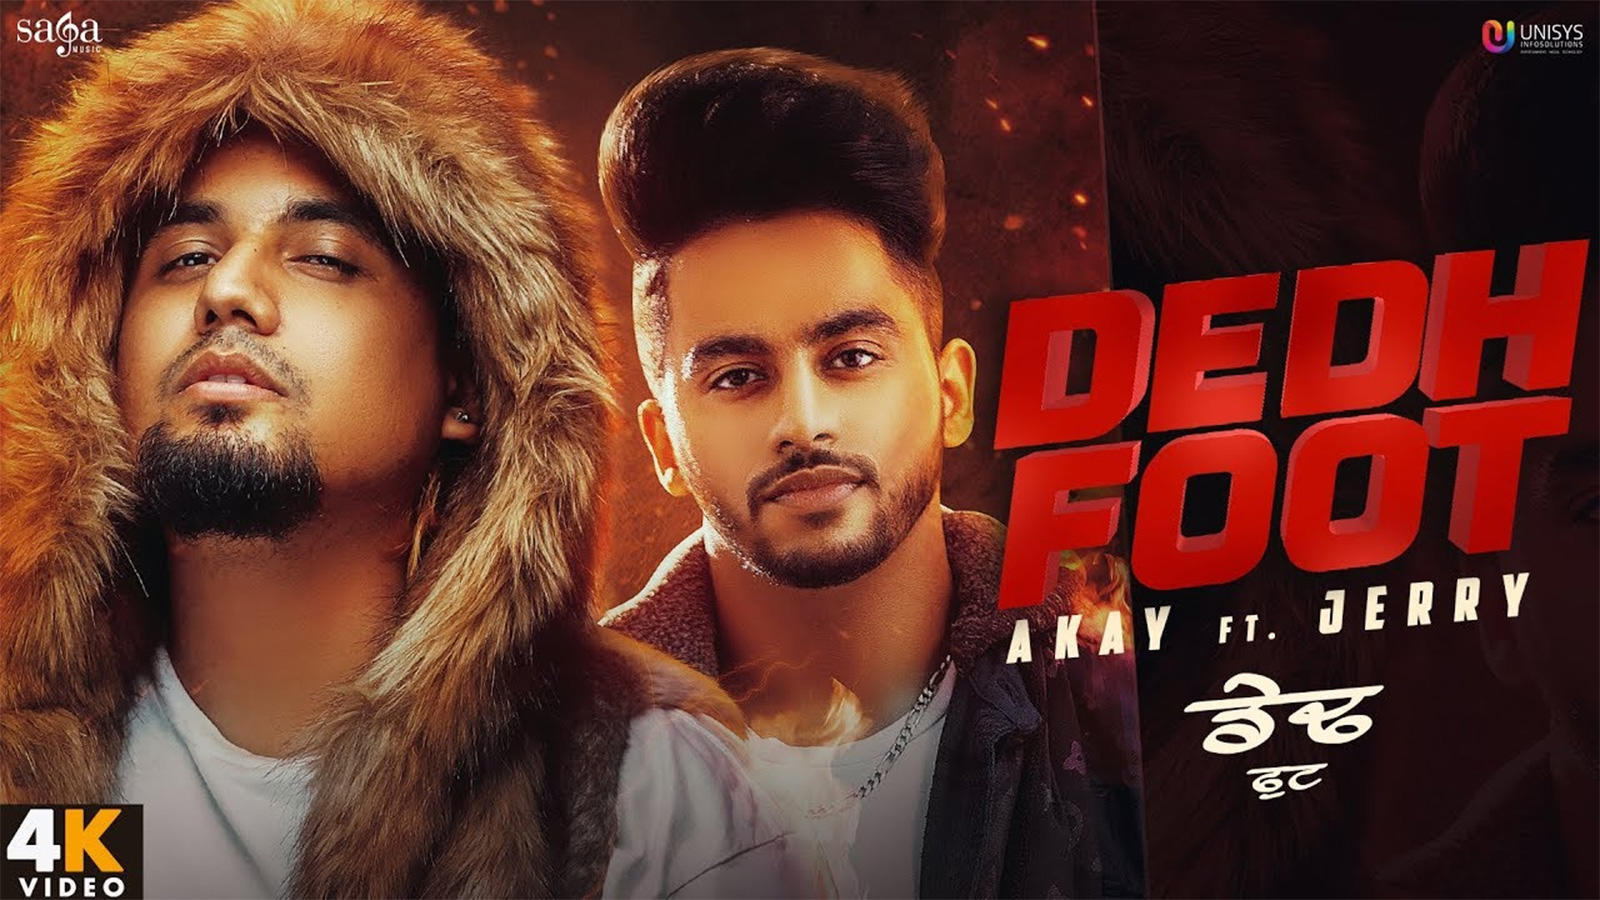 Latest Punjabi Song 'Dedh Futte Sand' Sung By A Kay Featuring Jerry |  Punjabi Video Songs - Times of India